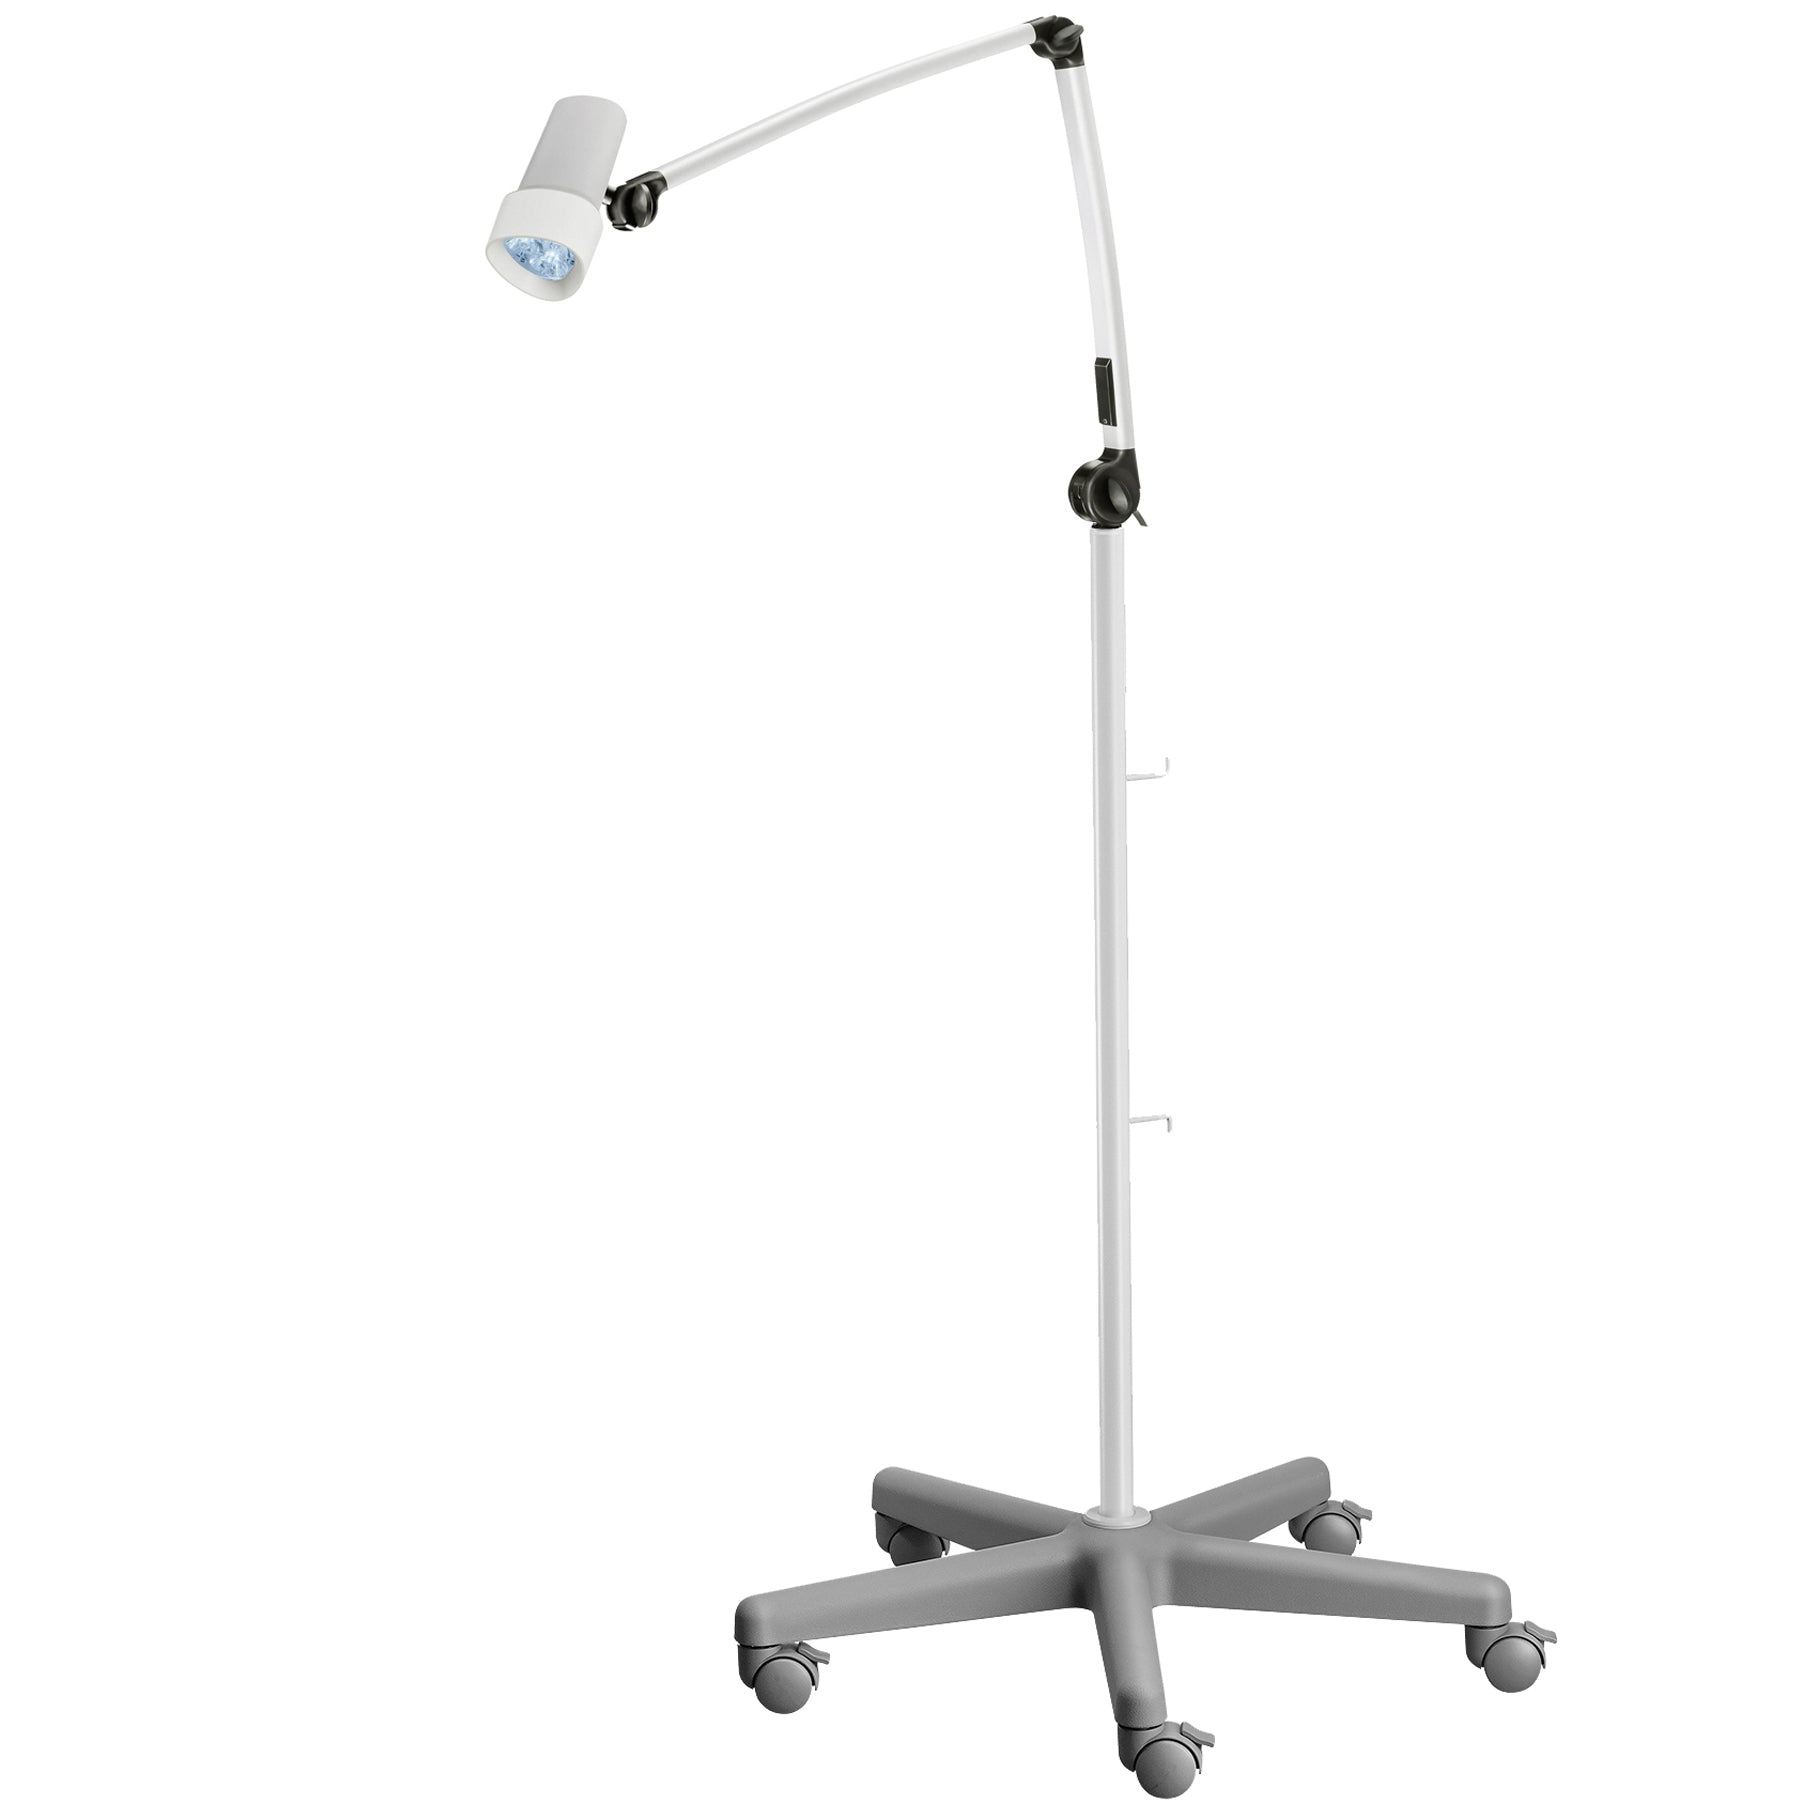 Derungs D15994910 Halux LED N30-1 P F1, Reading, Double Arm - Floor Stand